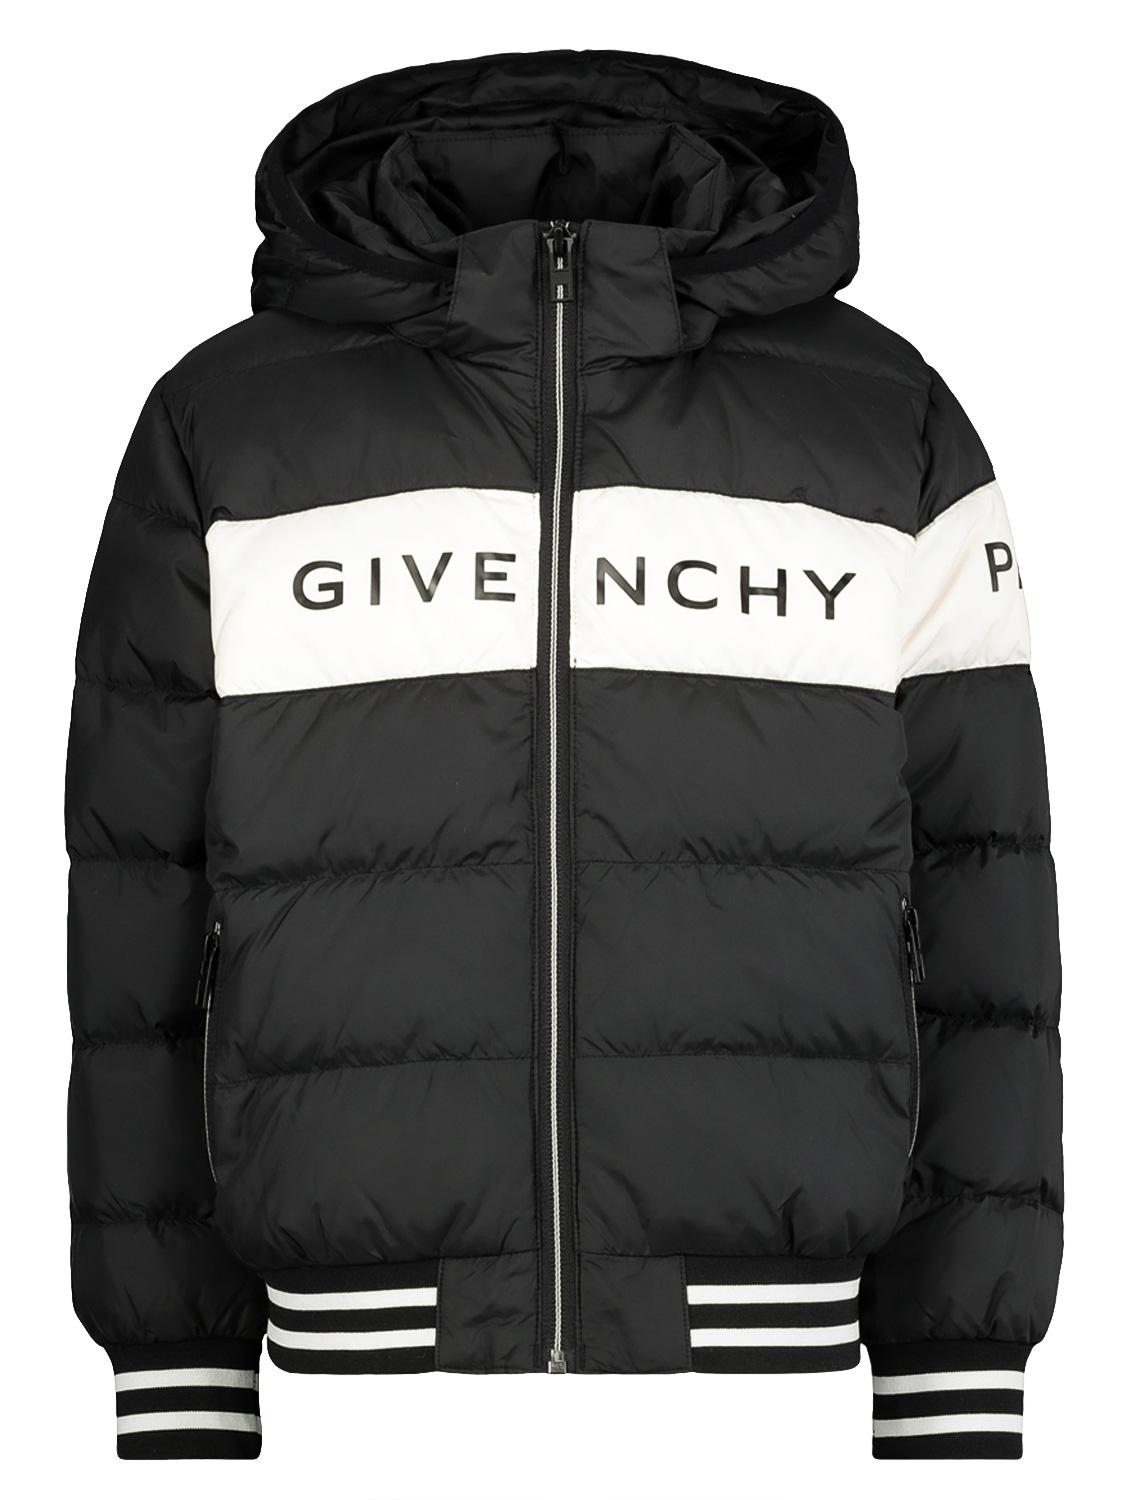 Givenchy Jacket for Sale